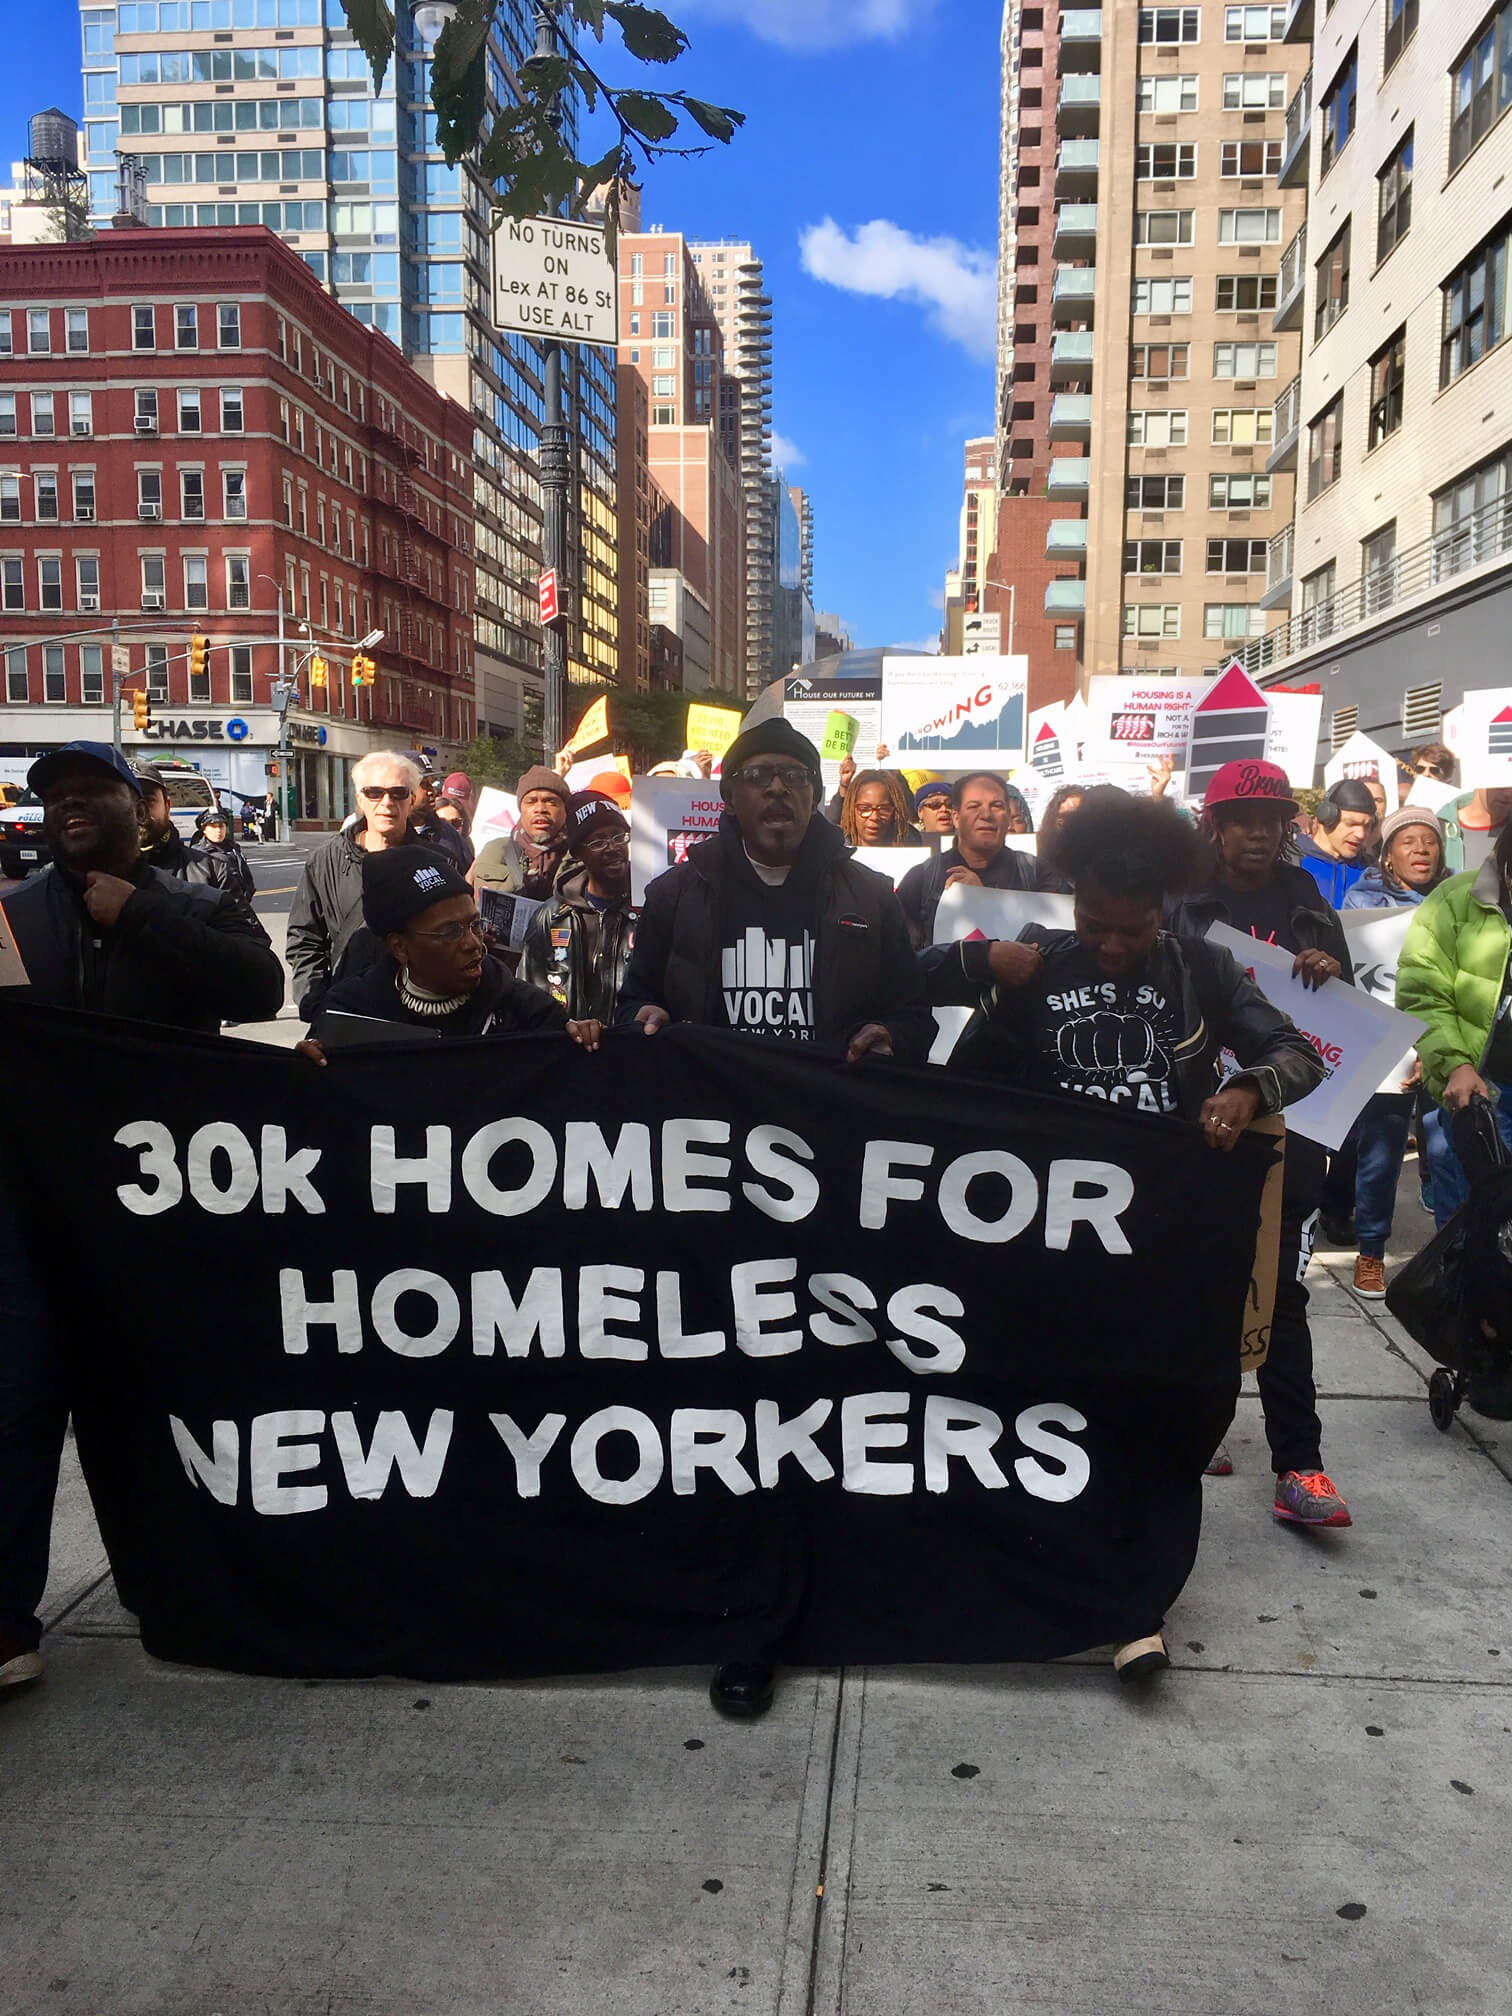 Several hundred homeless advocates march on Gracie Mansion to demand more 30,000 permanent units for New Yorkers in the shelter system.